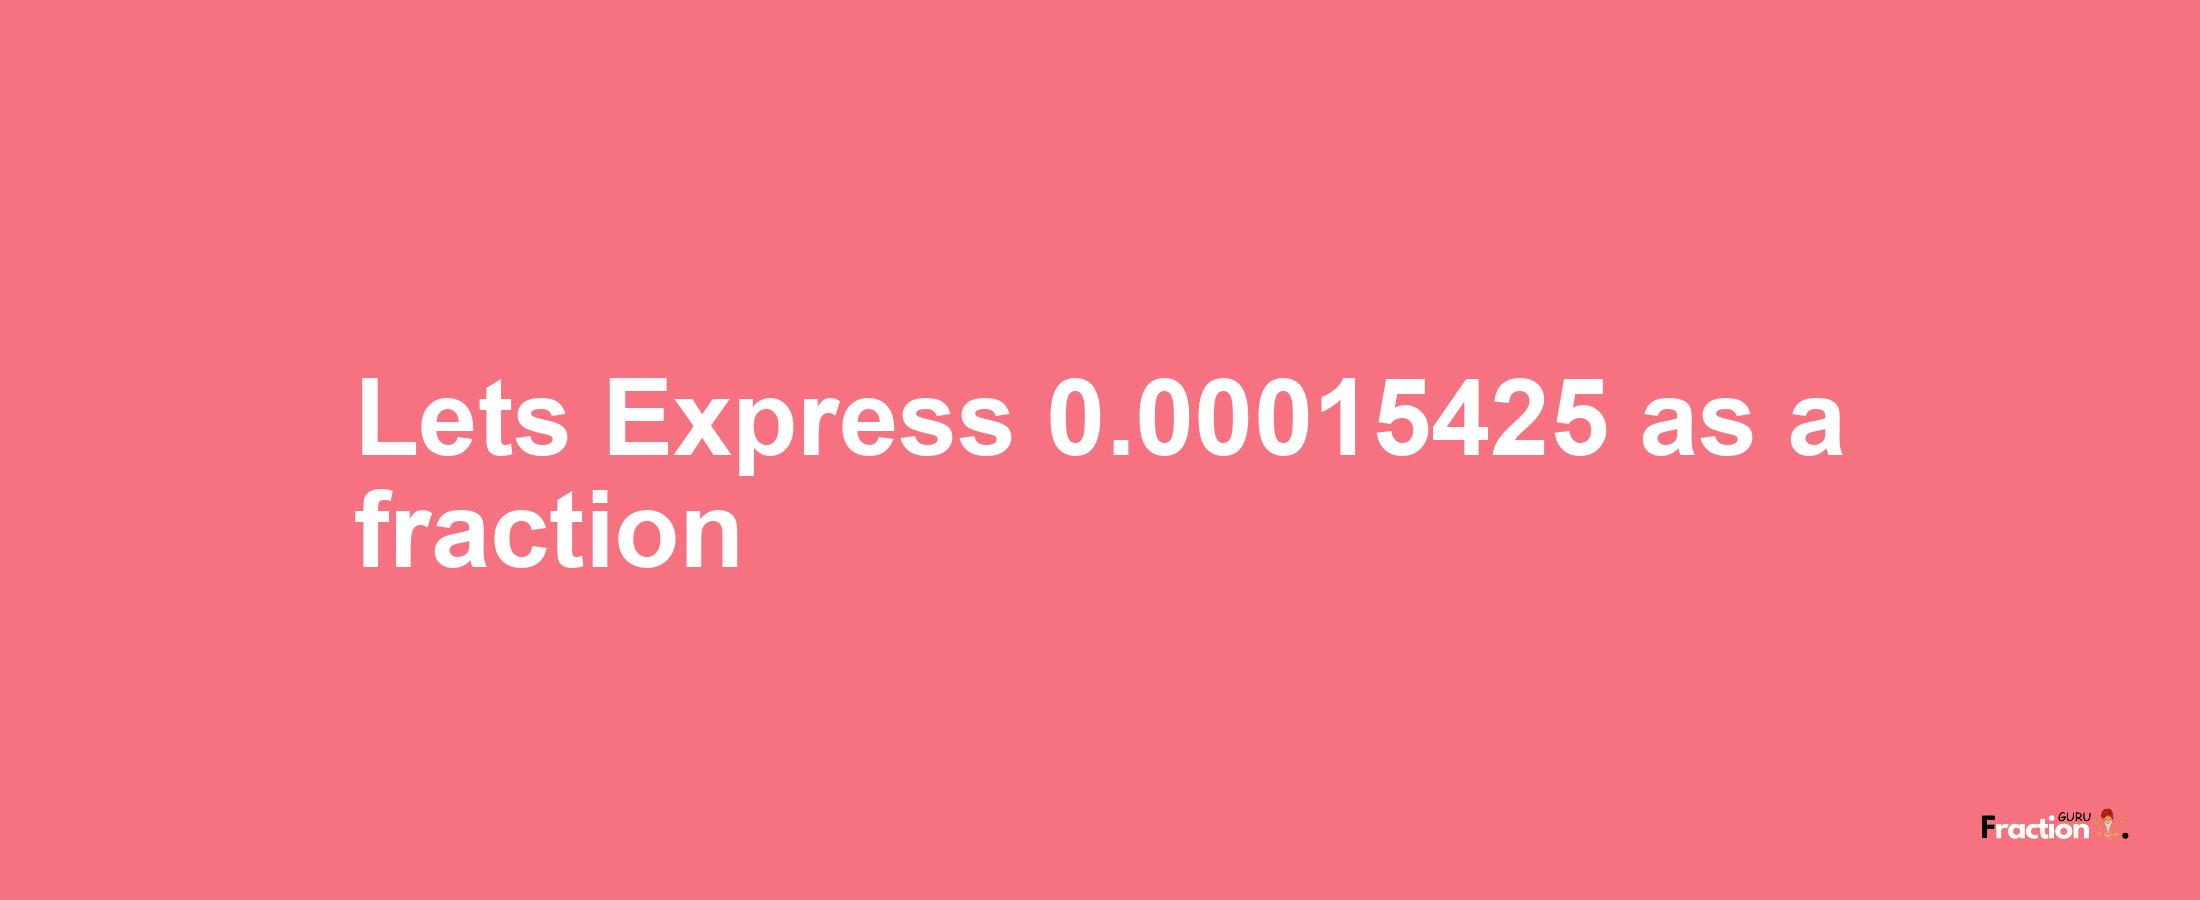 Lets Express 0.00015425 as afraction